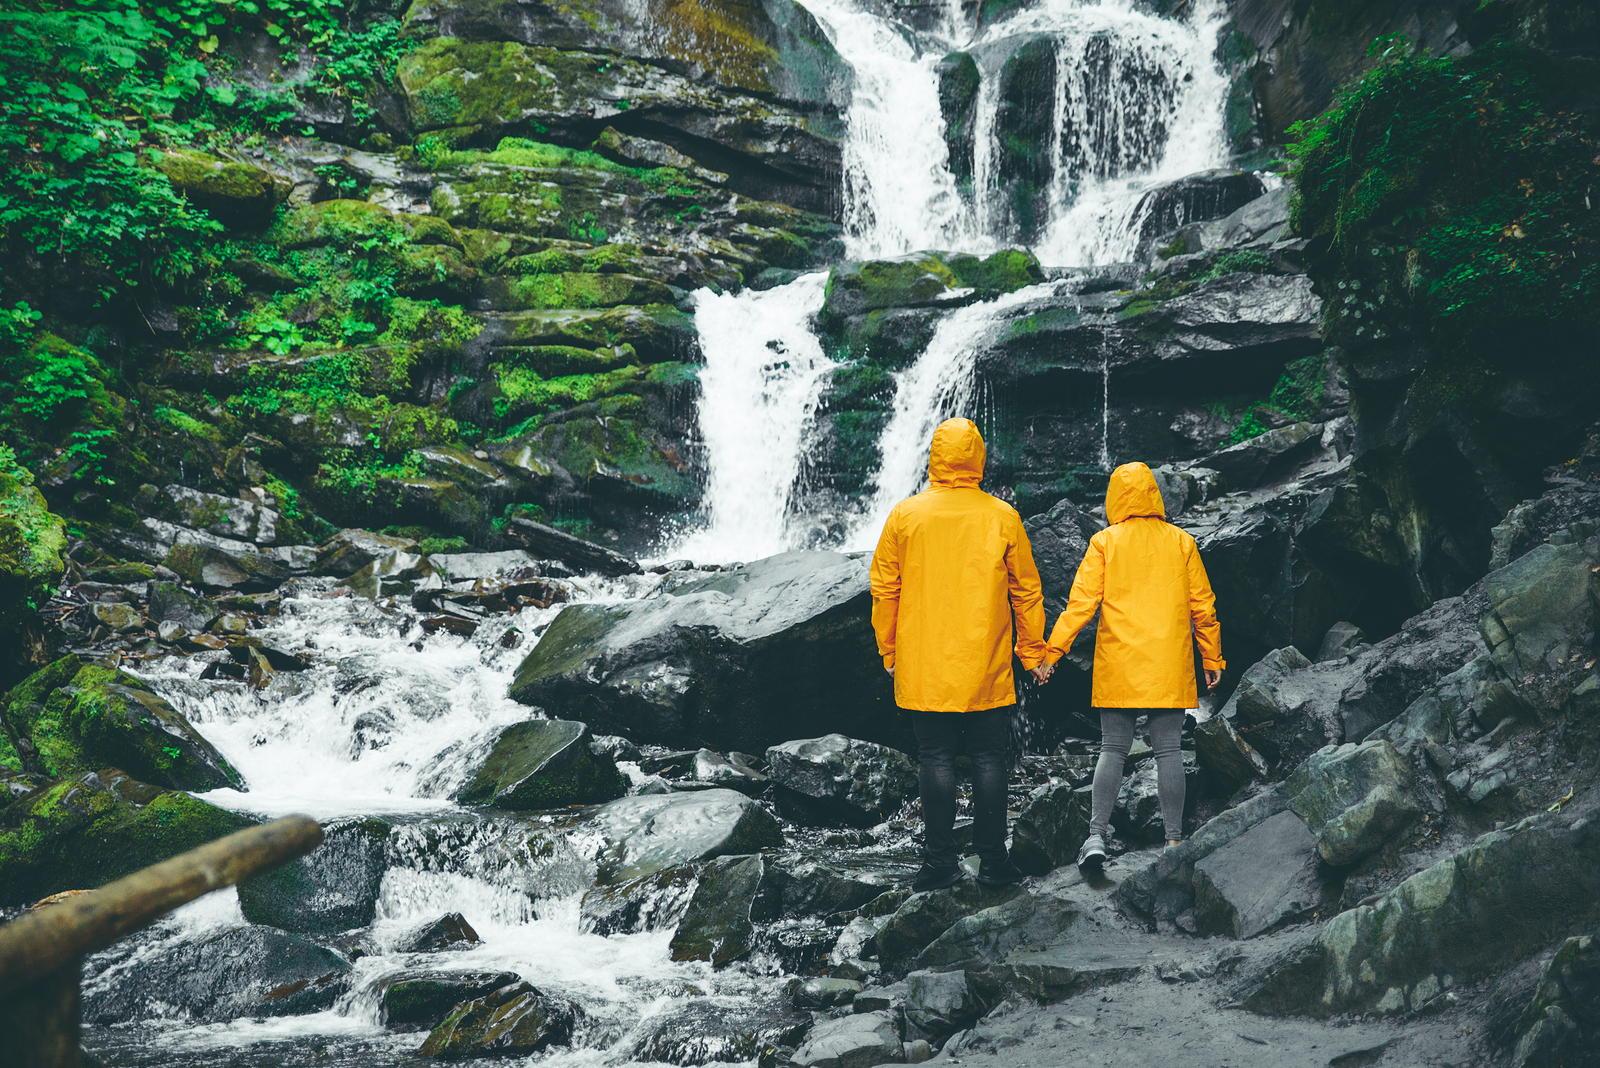 When you stand near a waterfall, you breathe in negative ions.